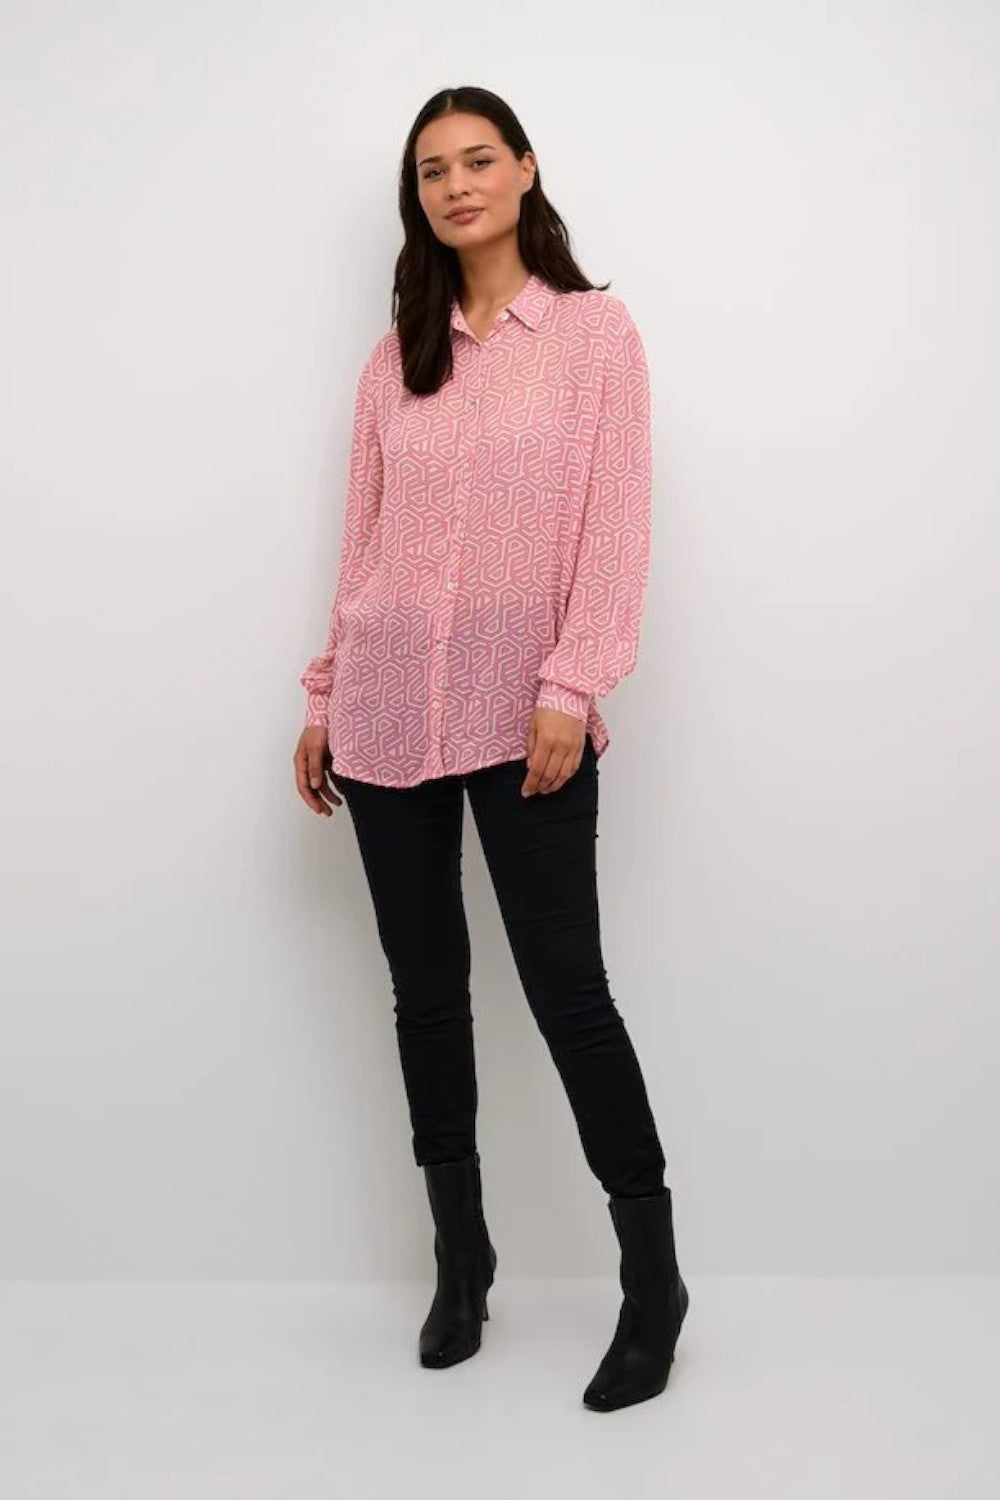 This long-sleeved shirt features a relaxed fit and mid-thigh length, lending a stylish yet comfortable vibe. Crafted in high-quality woven fabric, its geometric print is perfect for versatile wear, complementing both jeans and skirts for a trendy look.